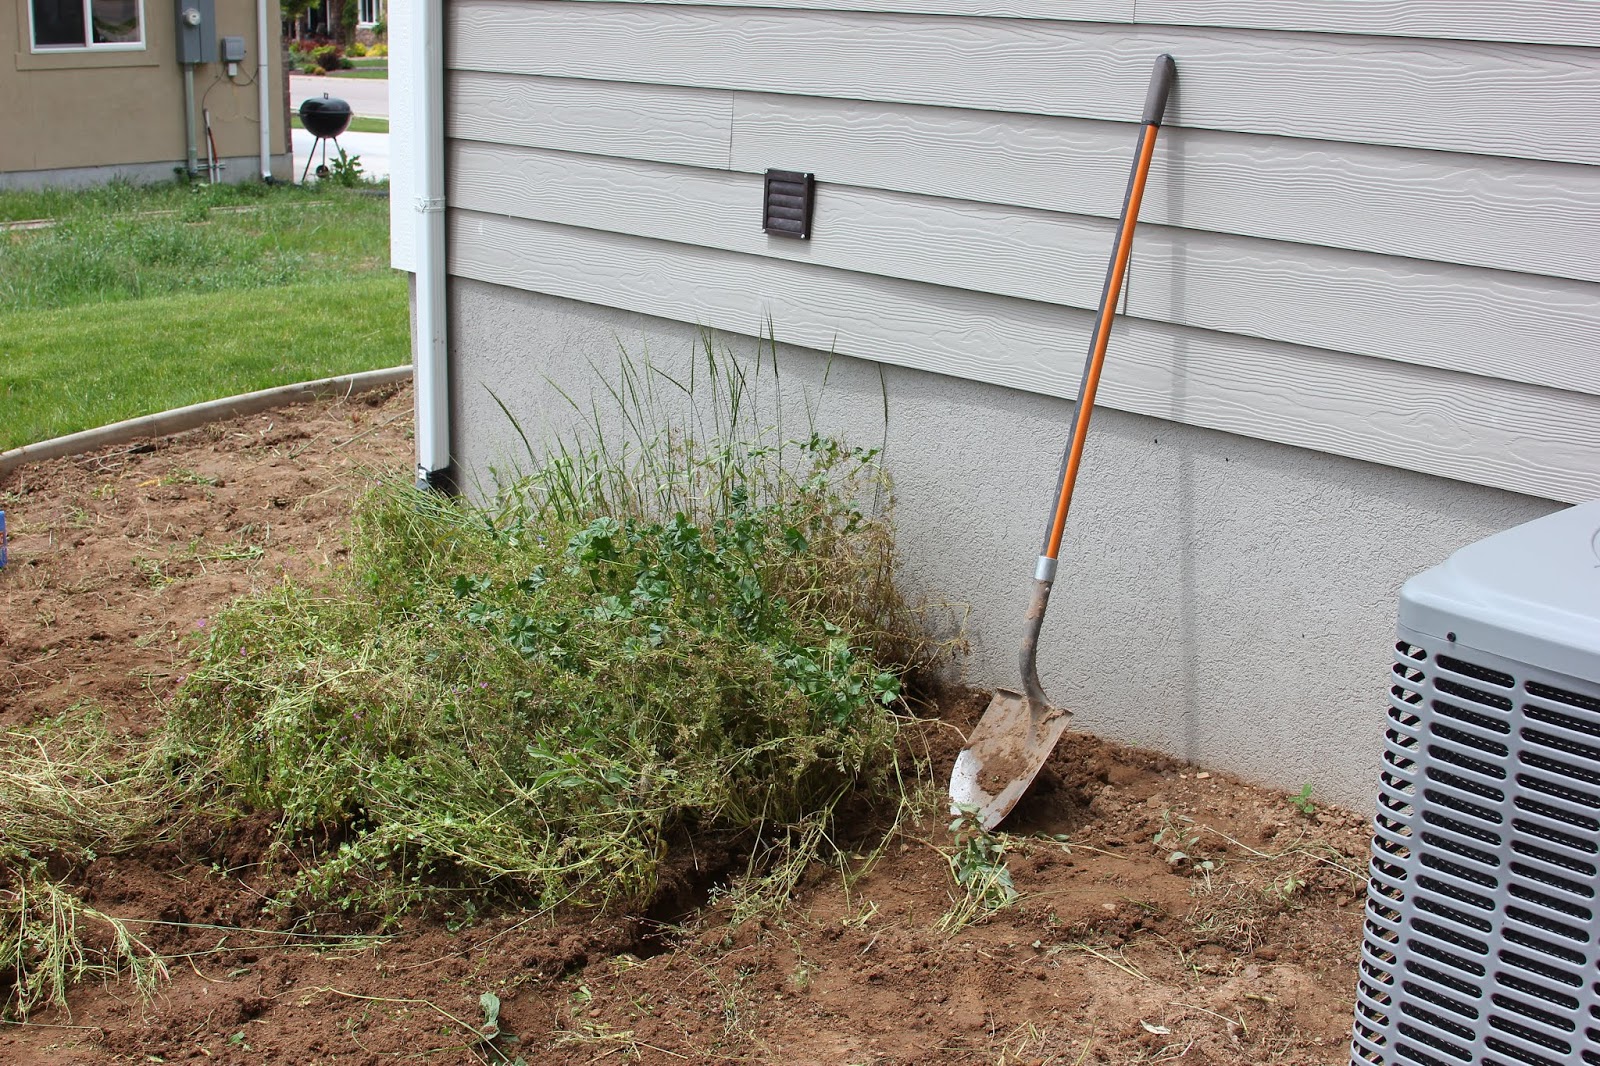 18 Landscaping Rules For Your Home The Dirt Blog Stauffers